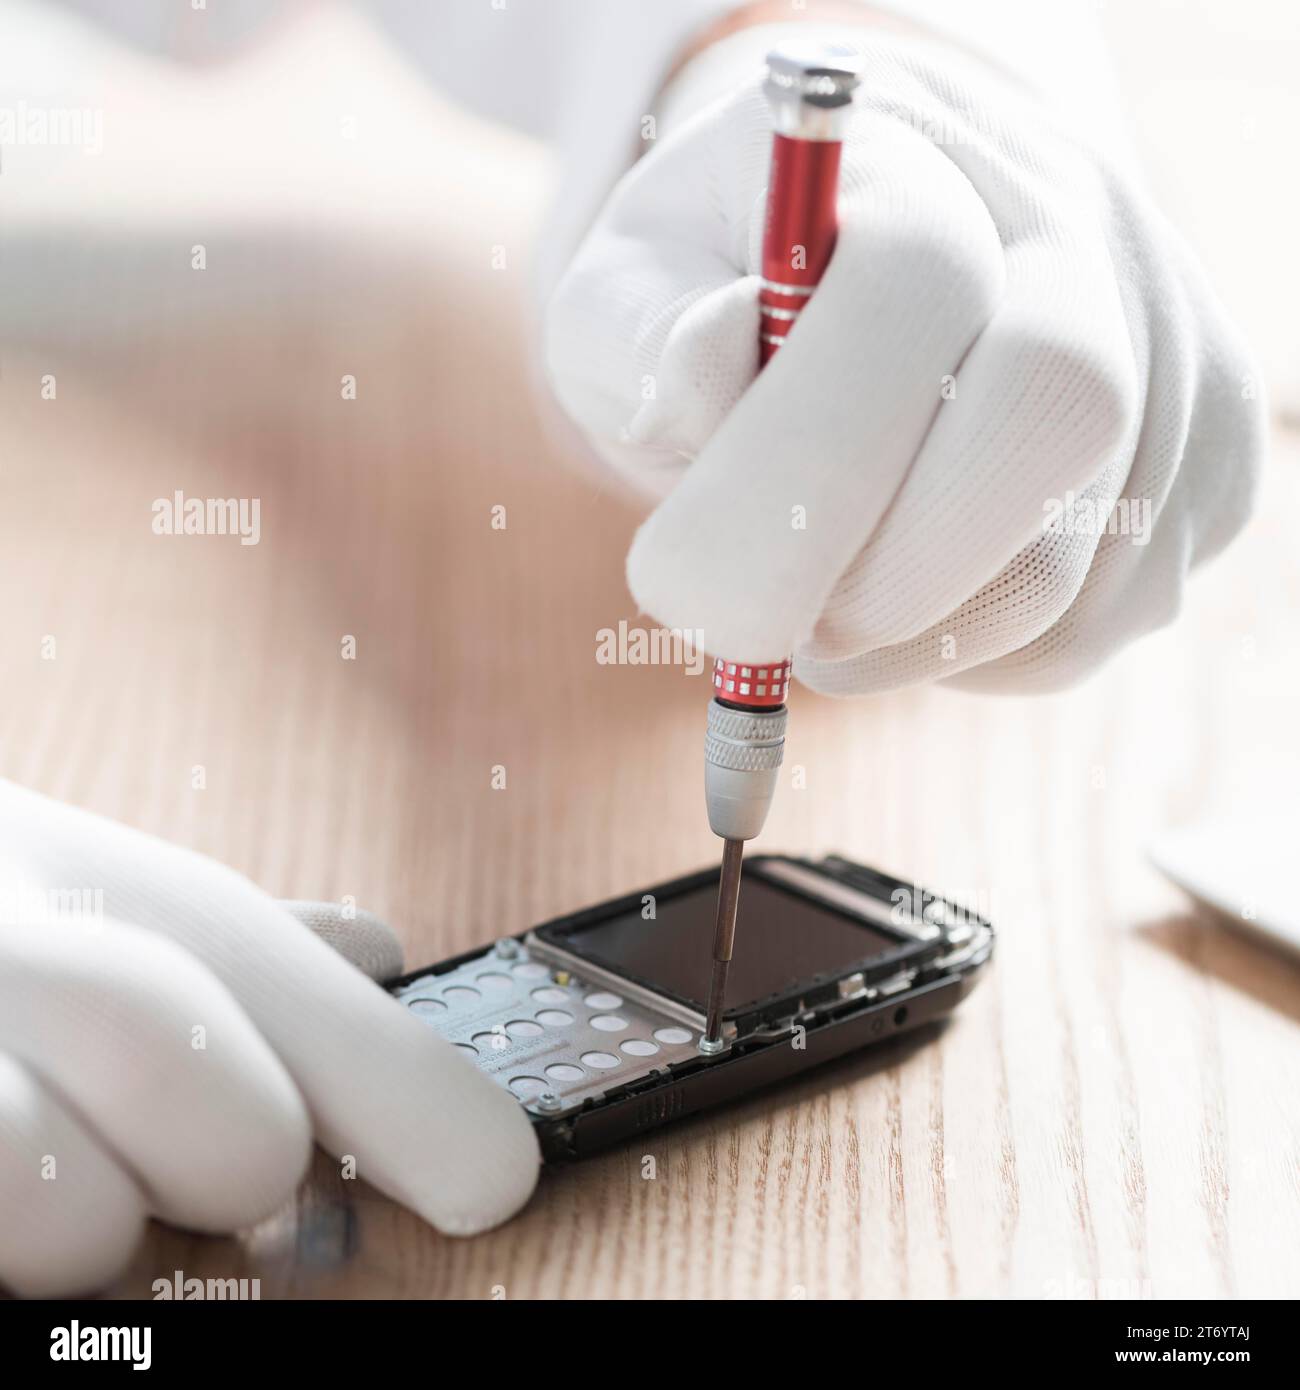 Male technician wearing gloves repairing cellphone Stock Photo